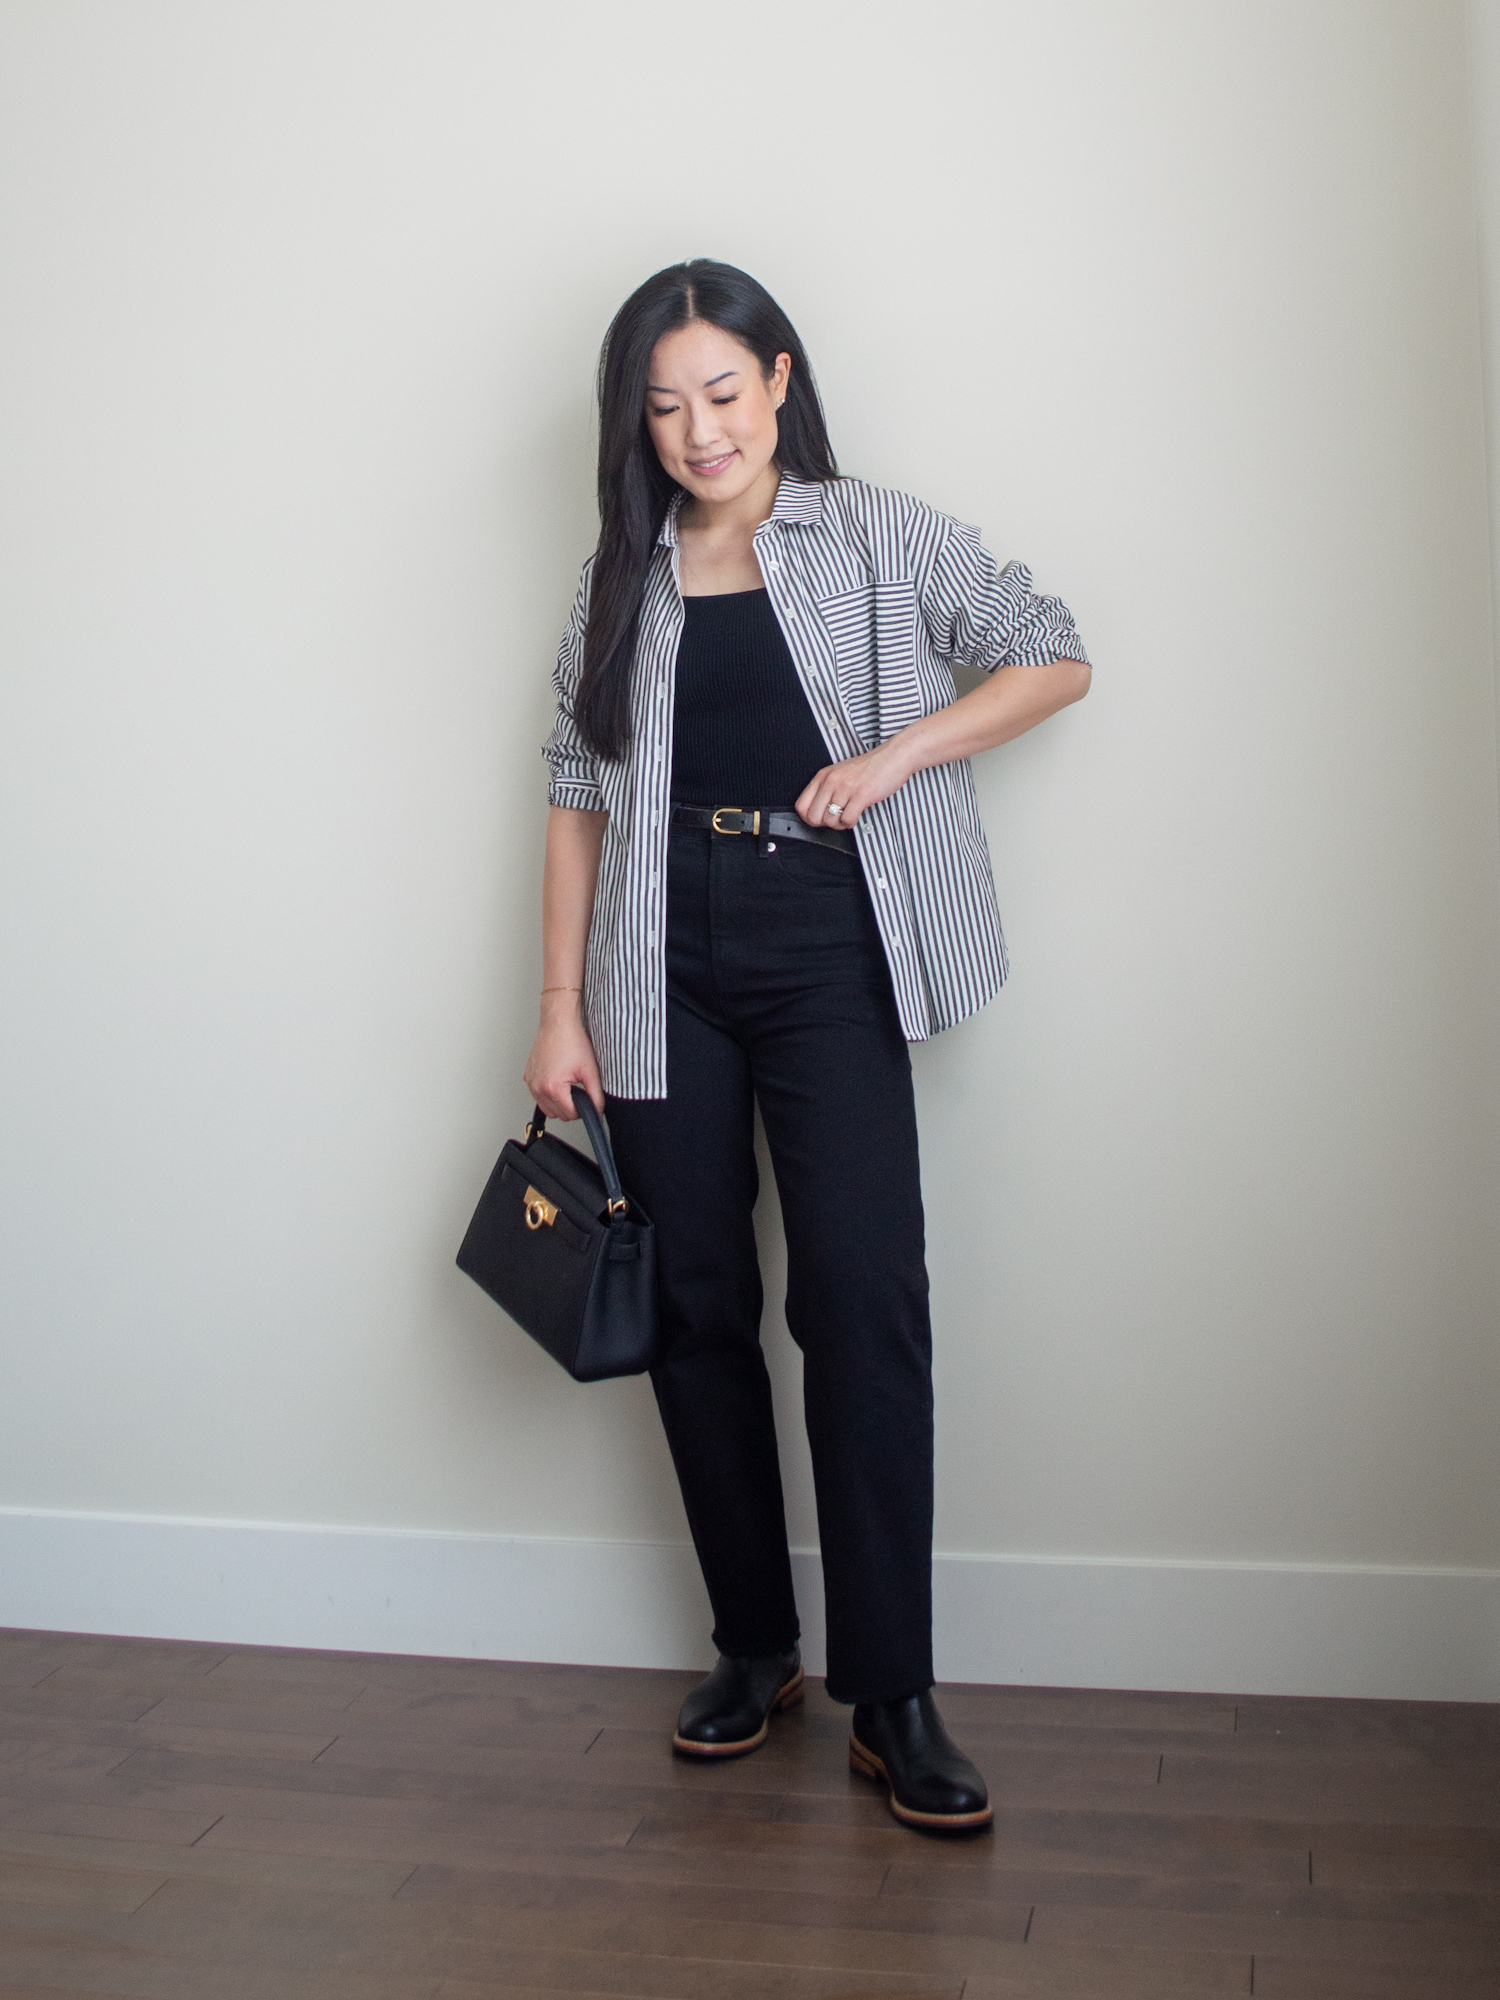 September Outfit Roundup - Comfy and Easy Outfits - Her Simple Sole